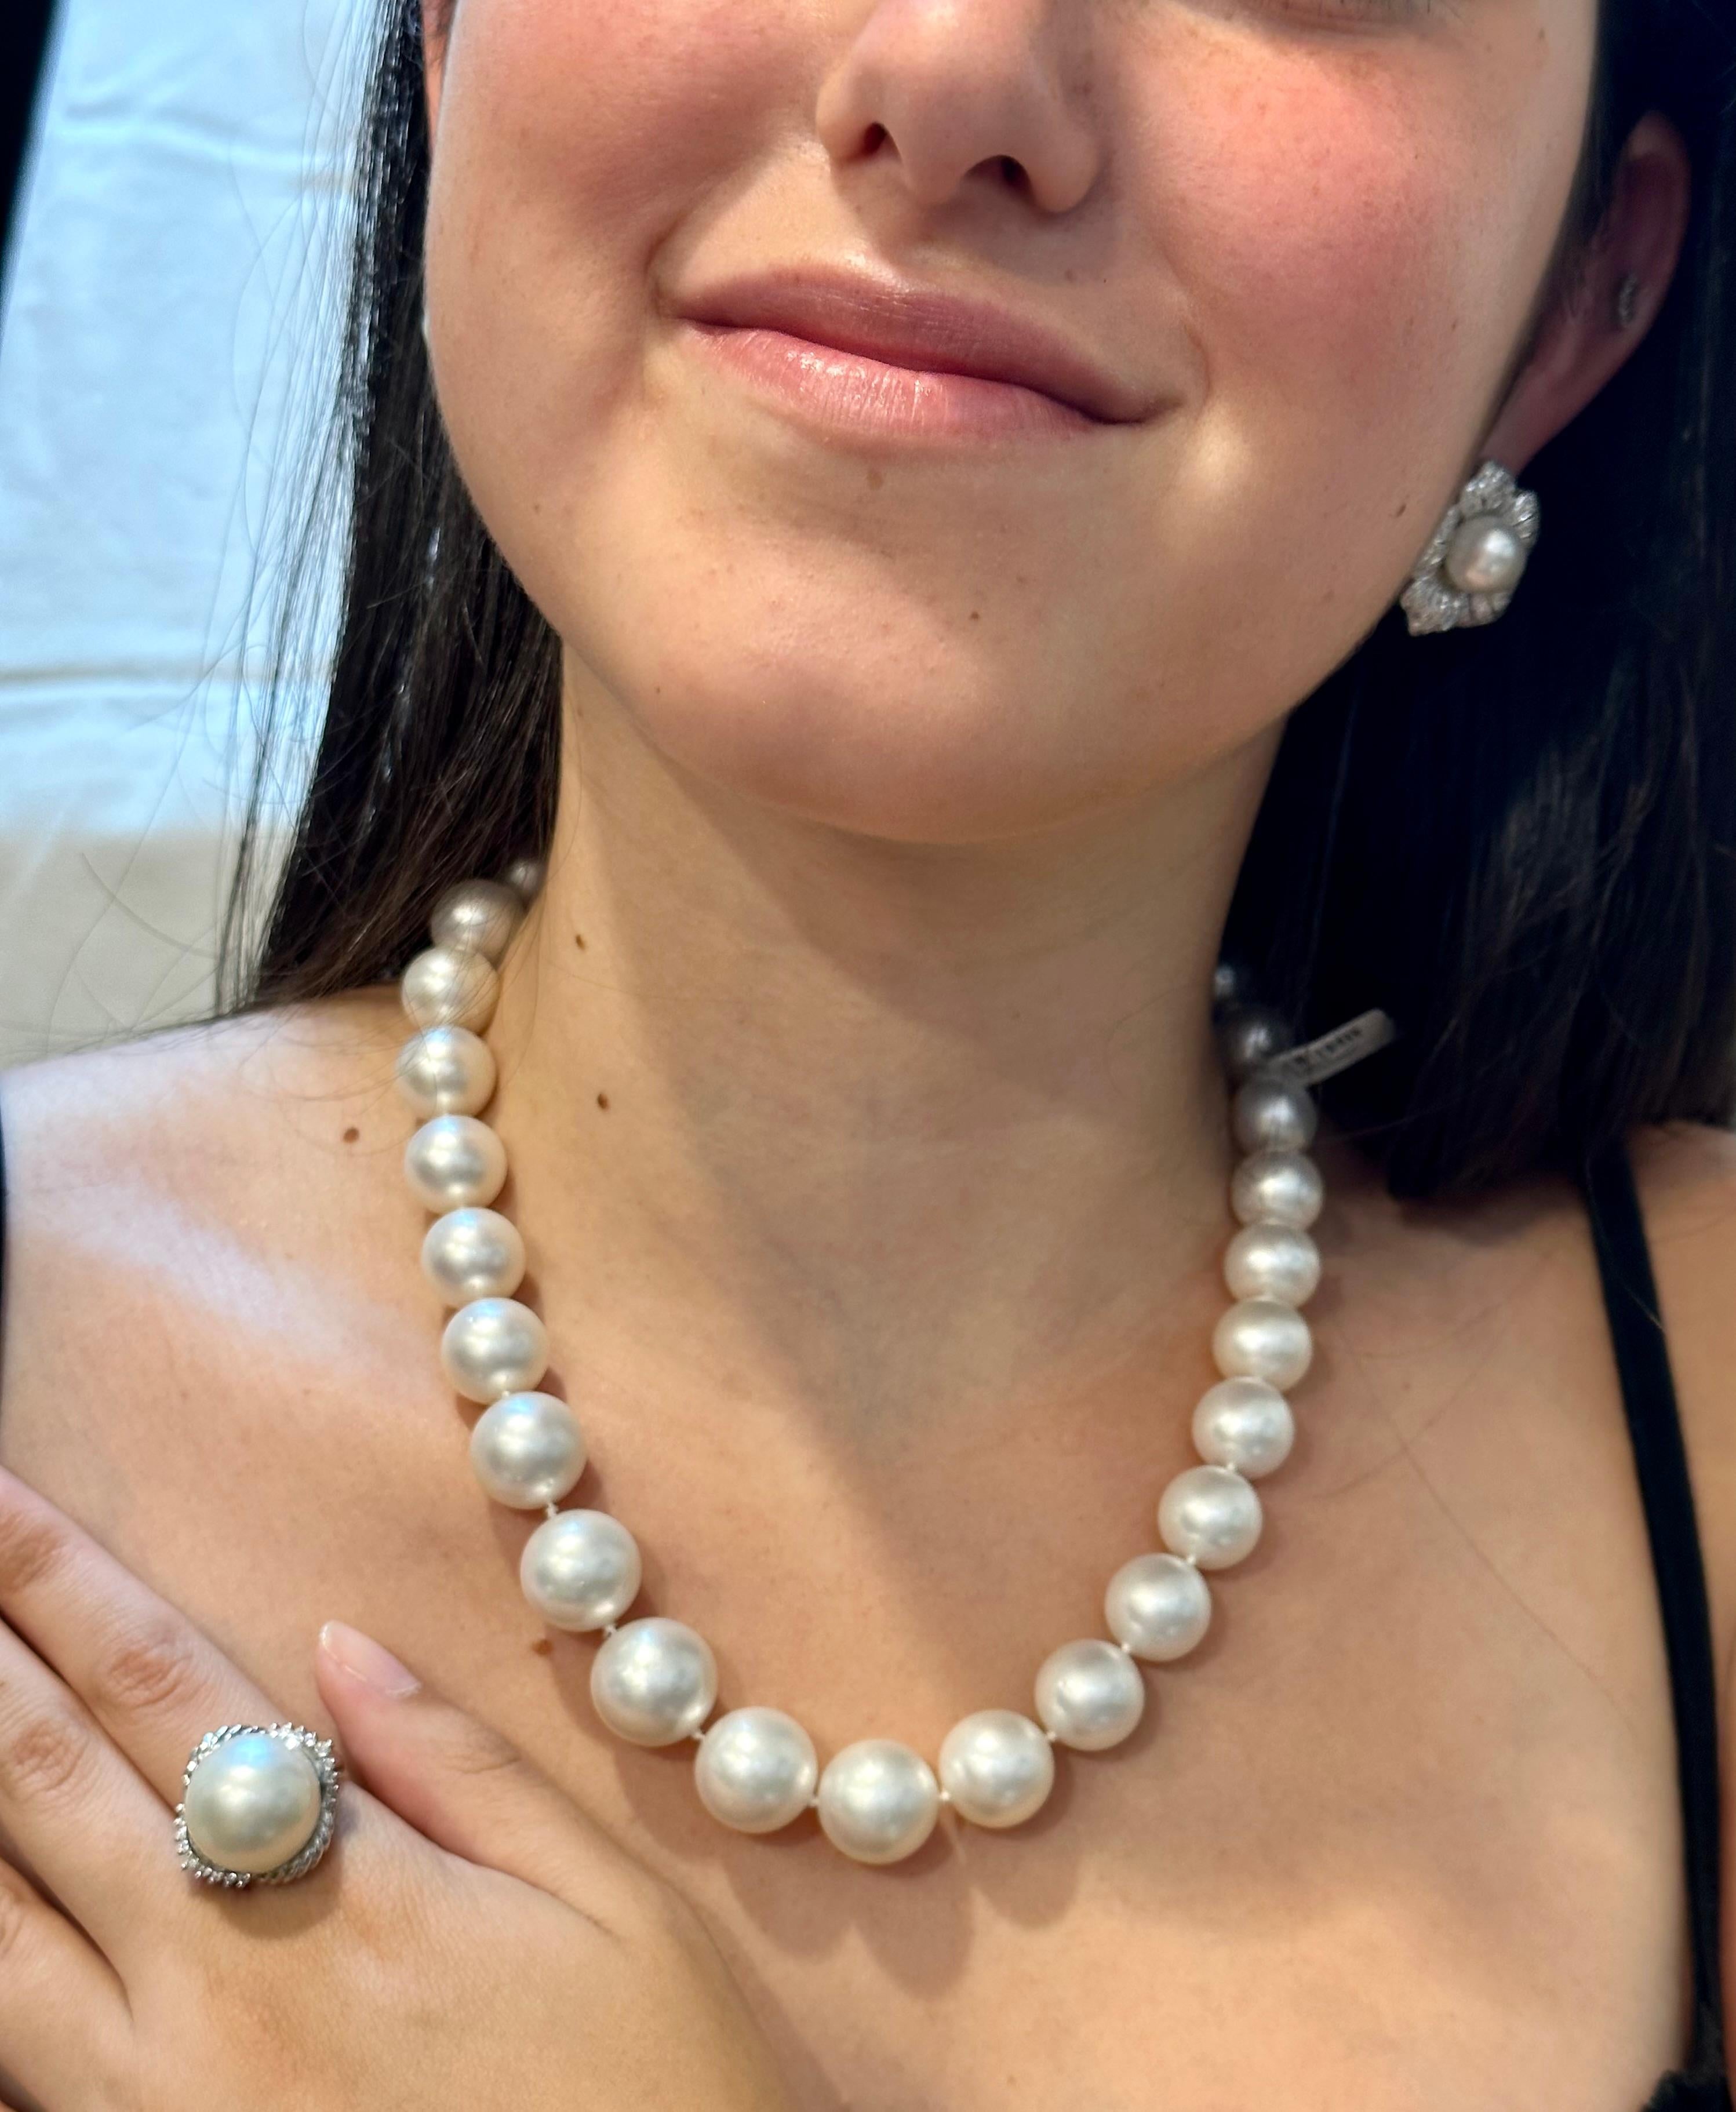 13-16.5mm White South Sea Round Pearl Necklace - AAA Quality, 29 Pieces +Diamond For Sale 5